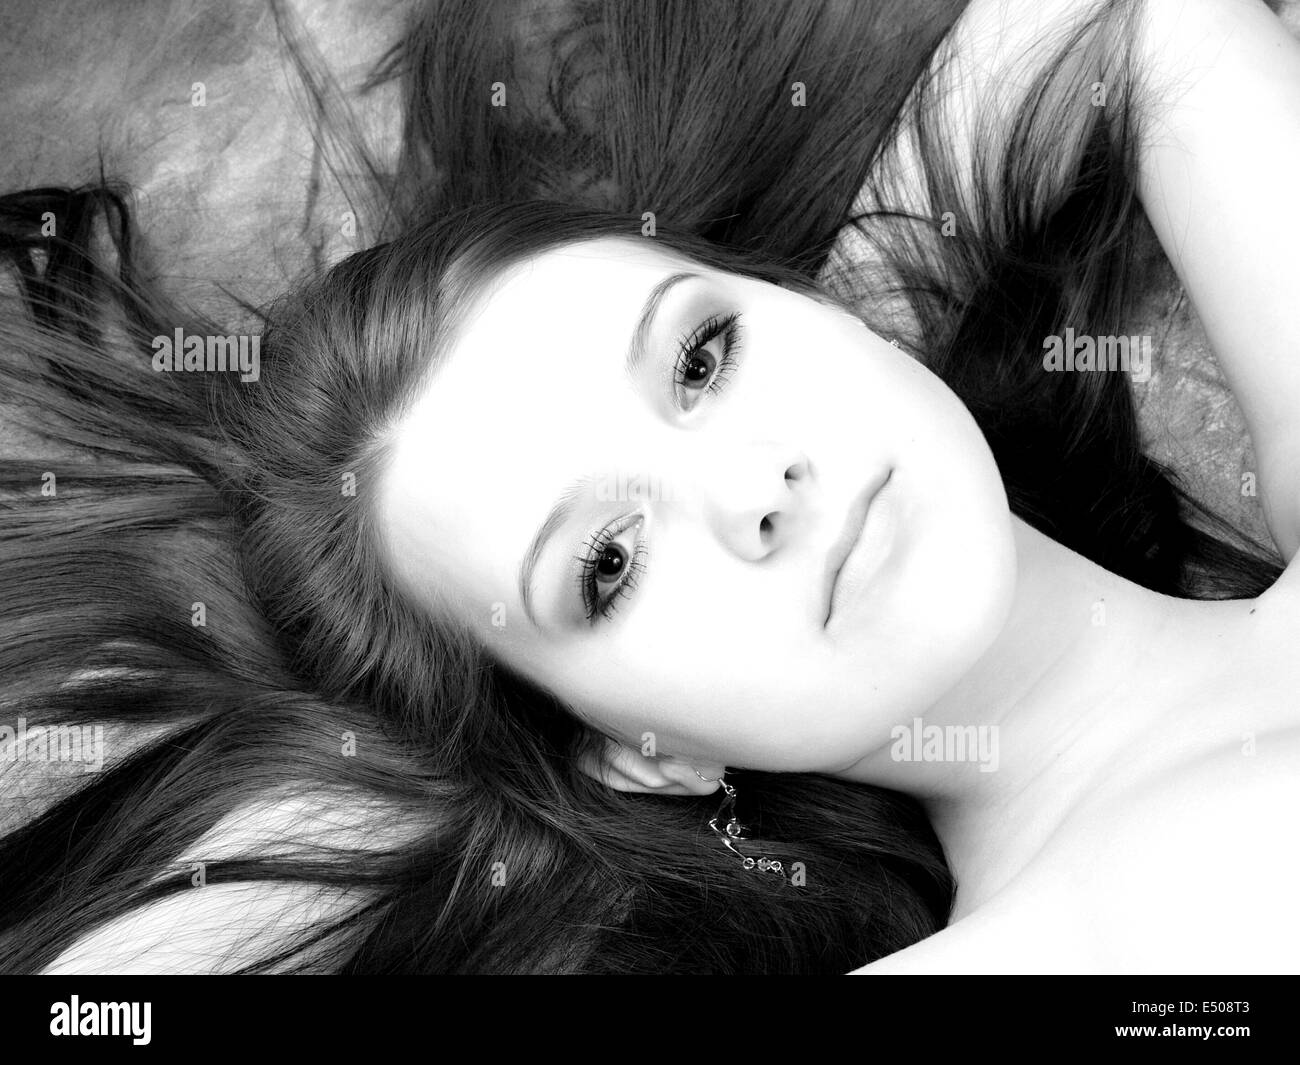 Czech model Black and White Stock Photos & Images - Alamy